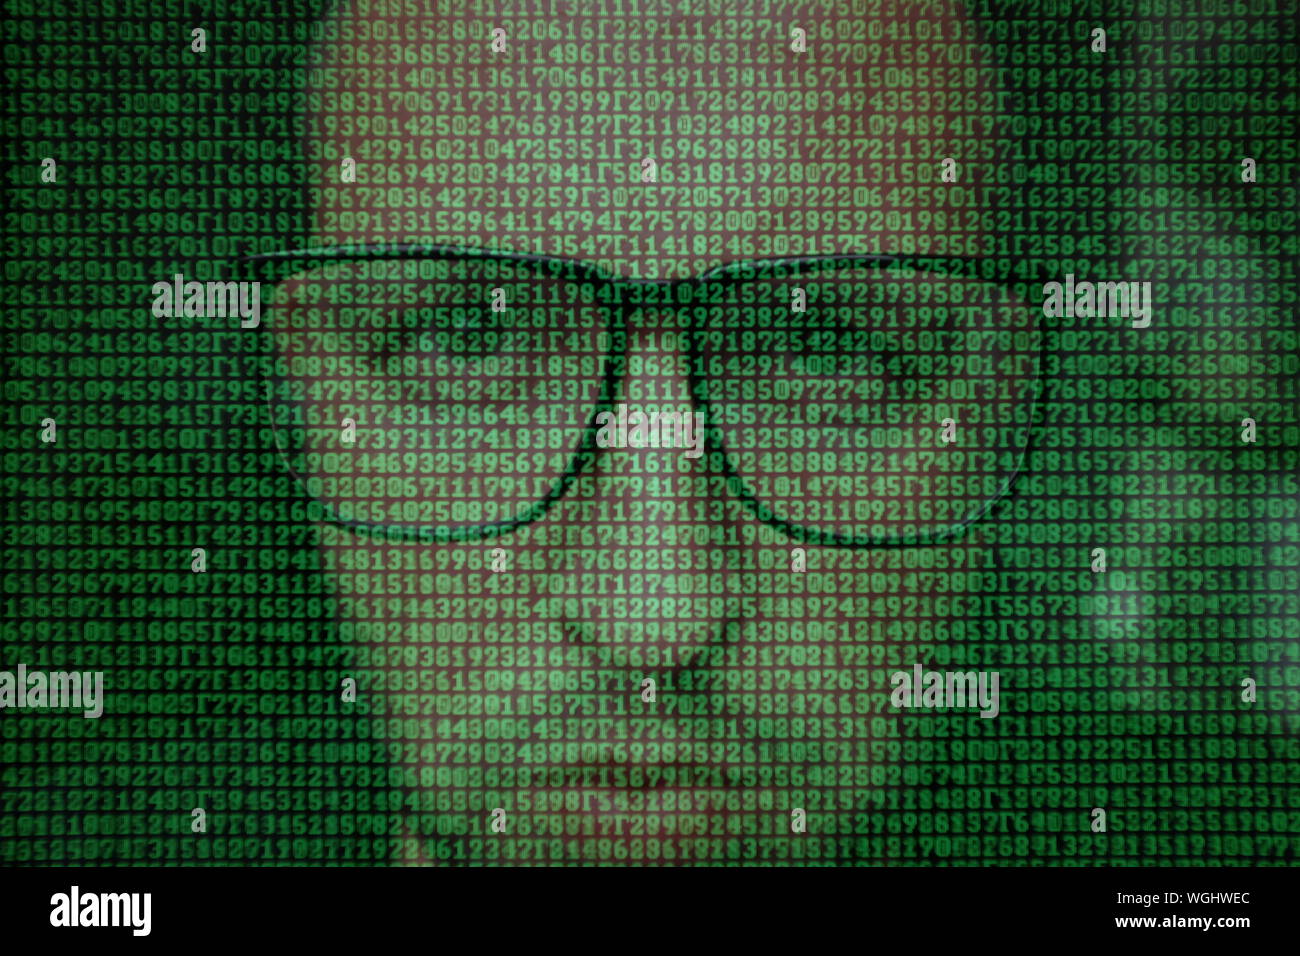 Digital Composite Image Of Man And Computer Coding Stock Photo